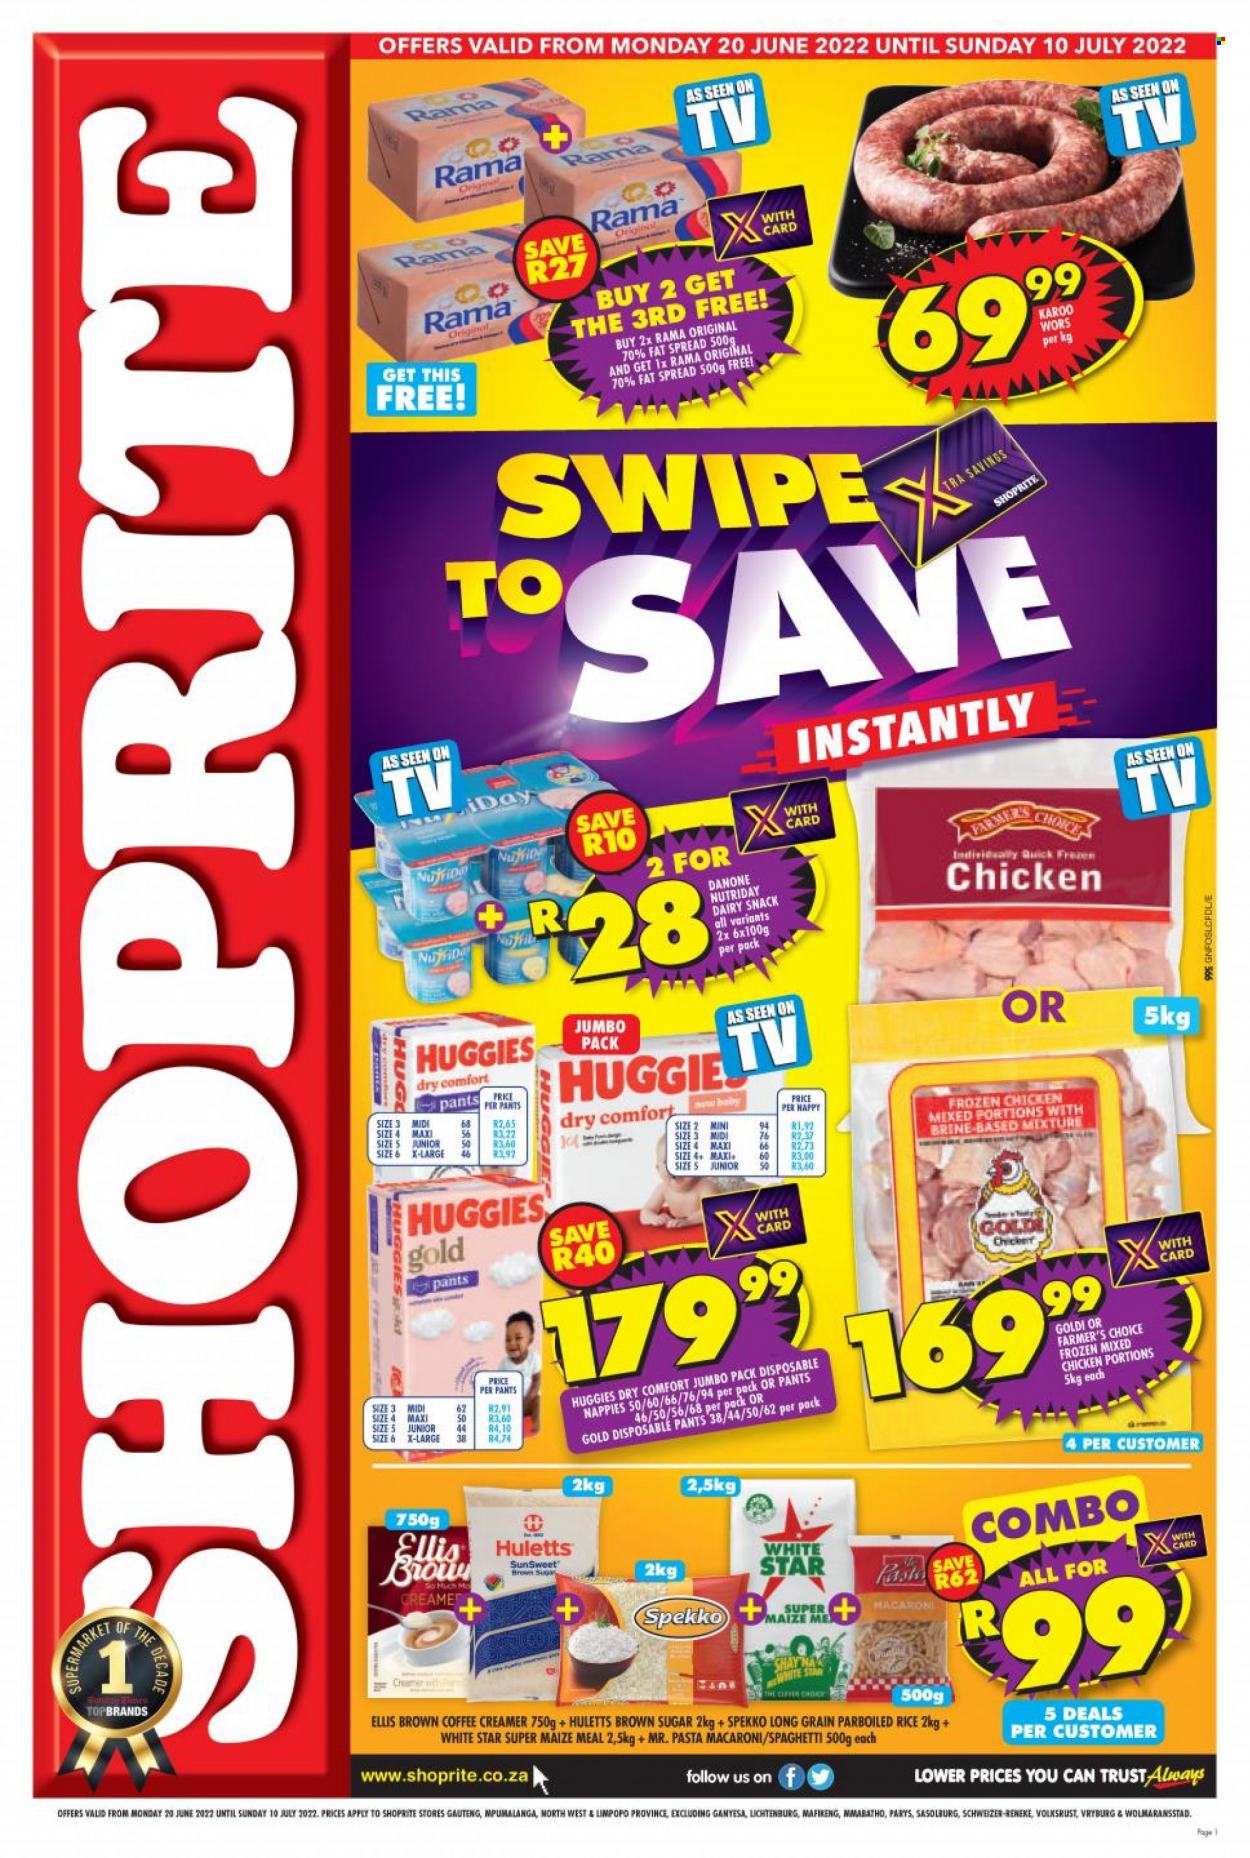 Shoprite catalogue  - 20/06/2022 - 10/07/2022 - Sales products - spaghetti, macaroni, pasta, Danone, NutriDay, Ellis Brown, fat spread, Rama, creamer, snack, cane sugar, maize meal, Huletts, White Star, rice, parboiled rice, Spekko, chicken meat, Huggies, pants, nappies. Page 1.